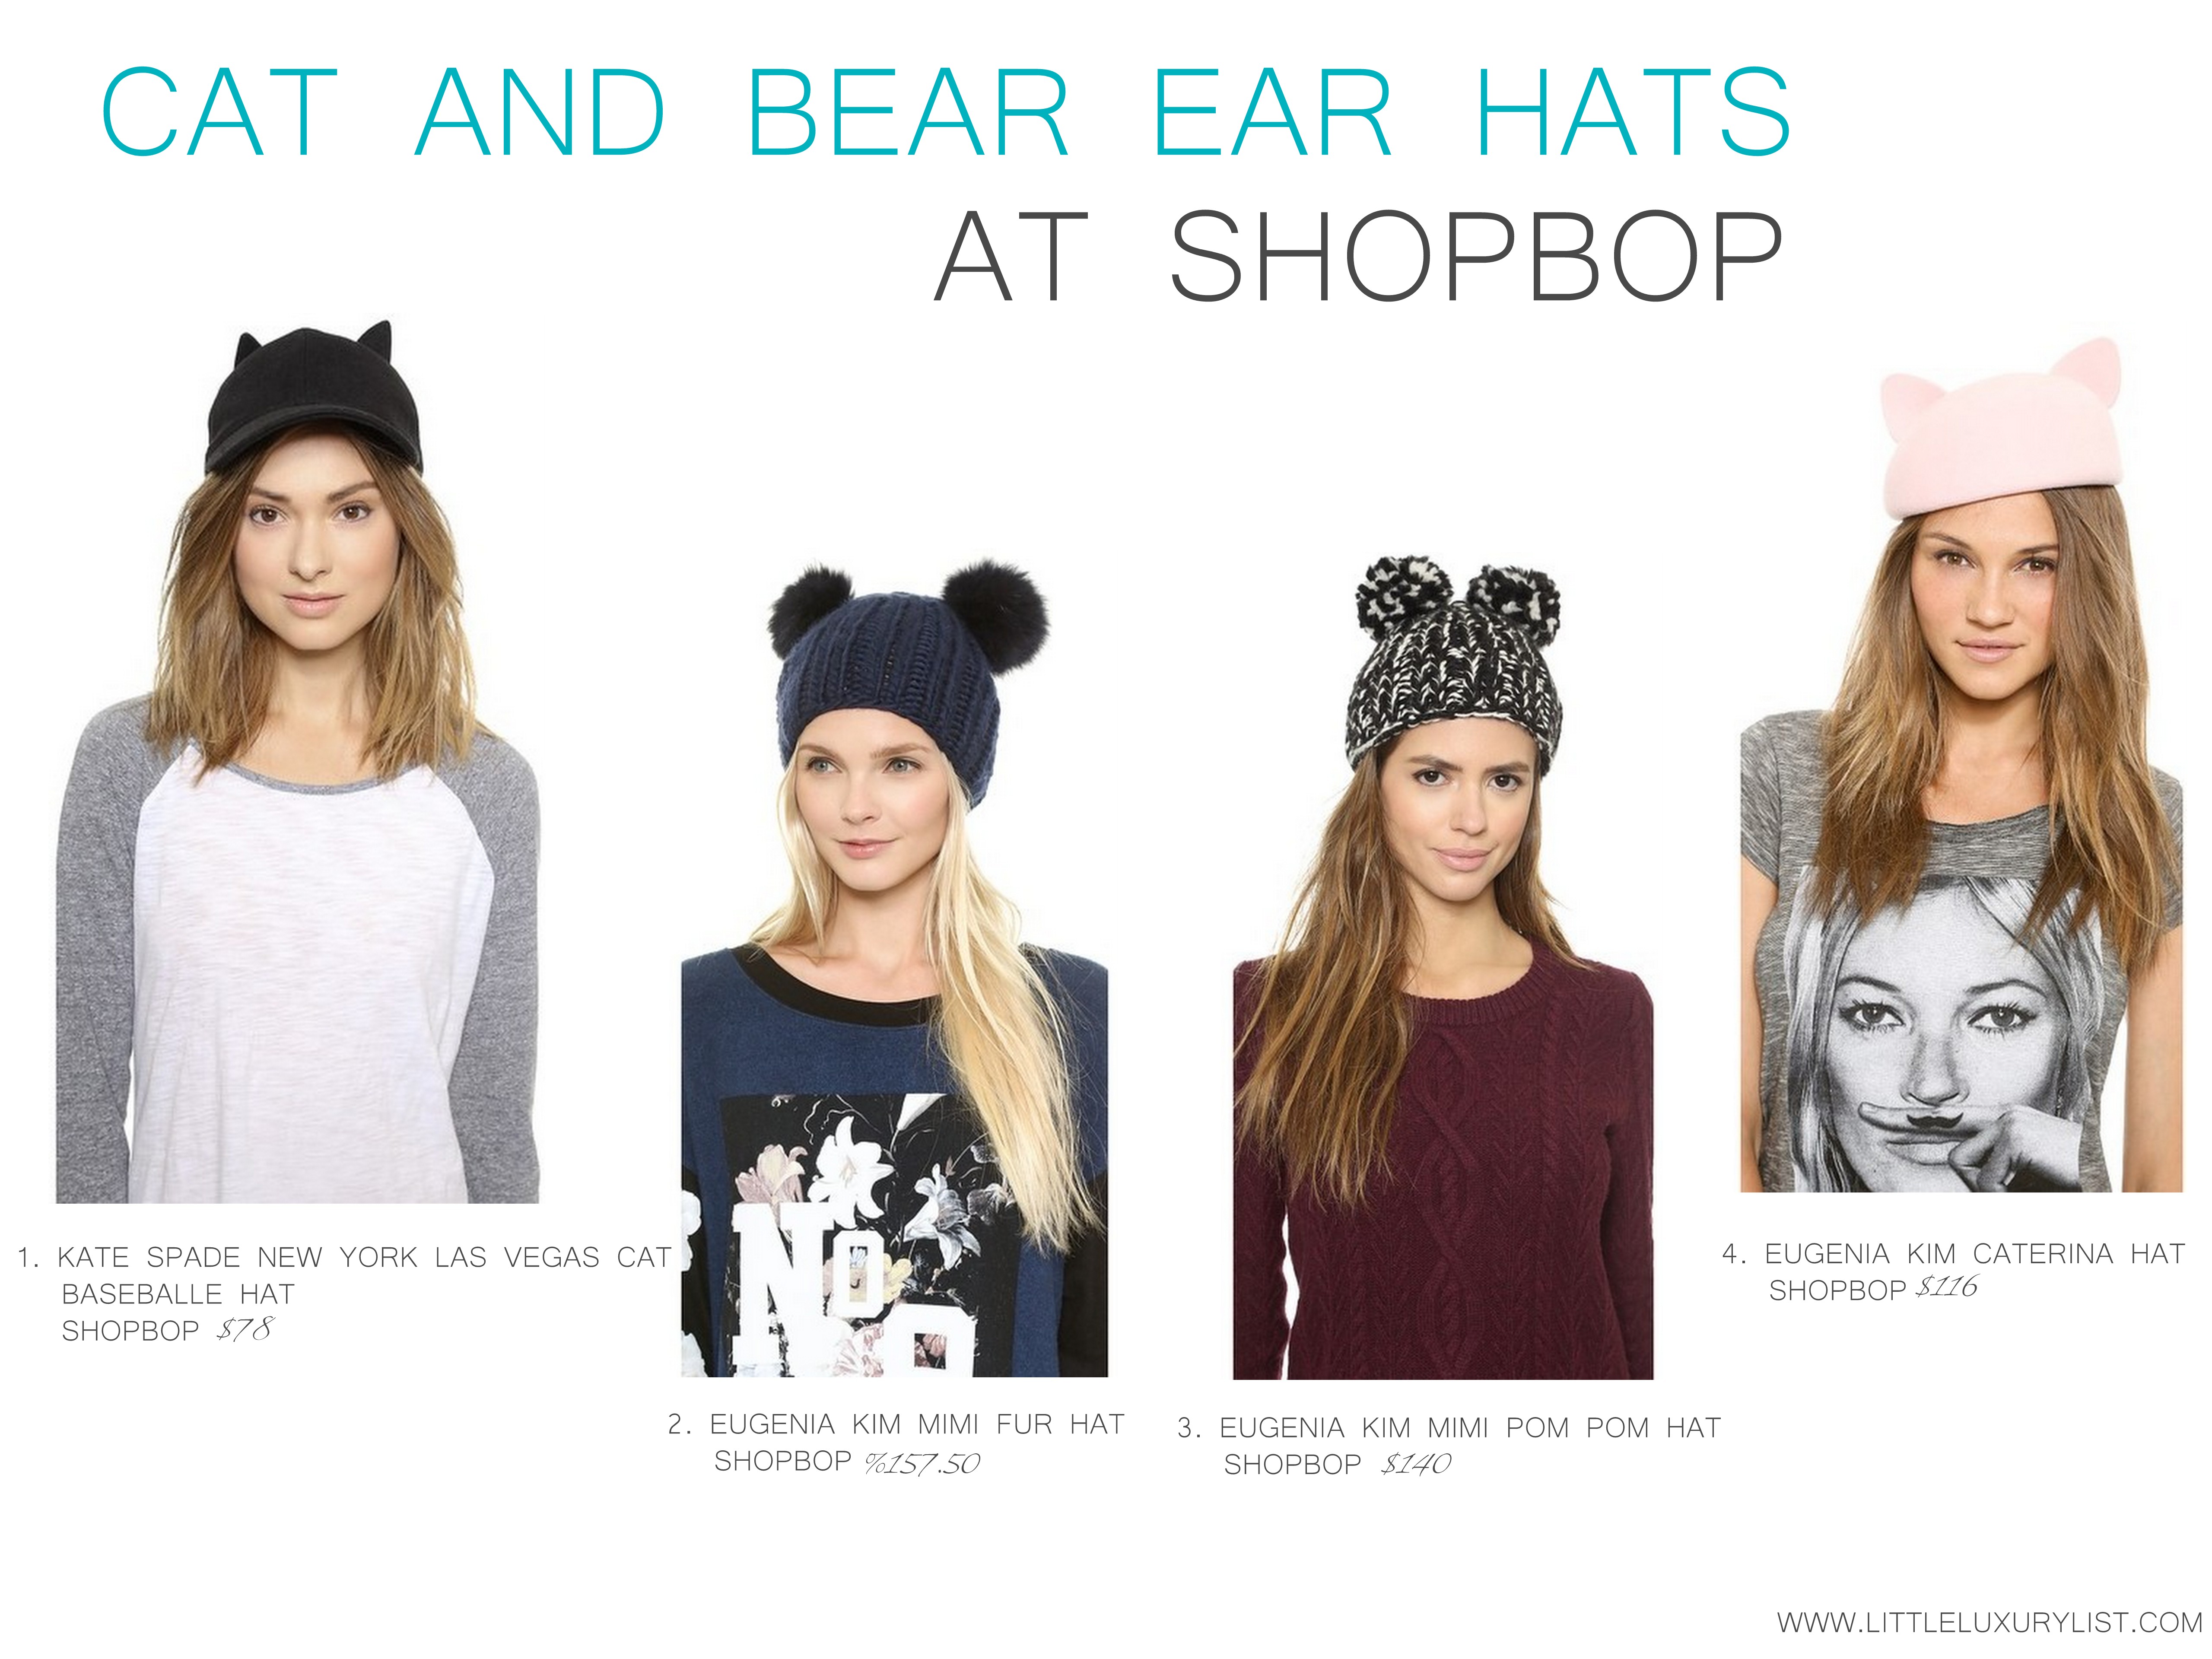 Fashion Highlight Cat And Bear Ear Hats At Shopbop Little Luxury List